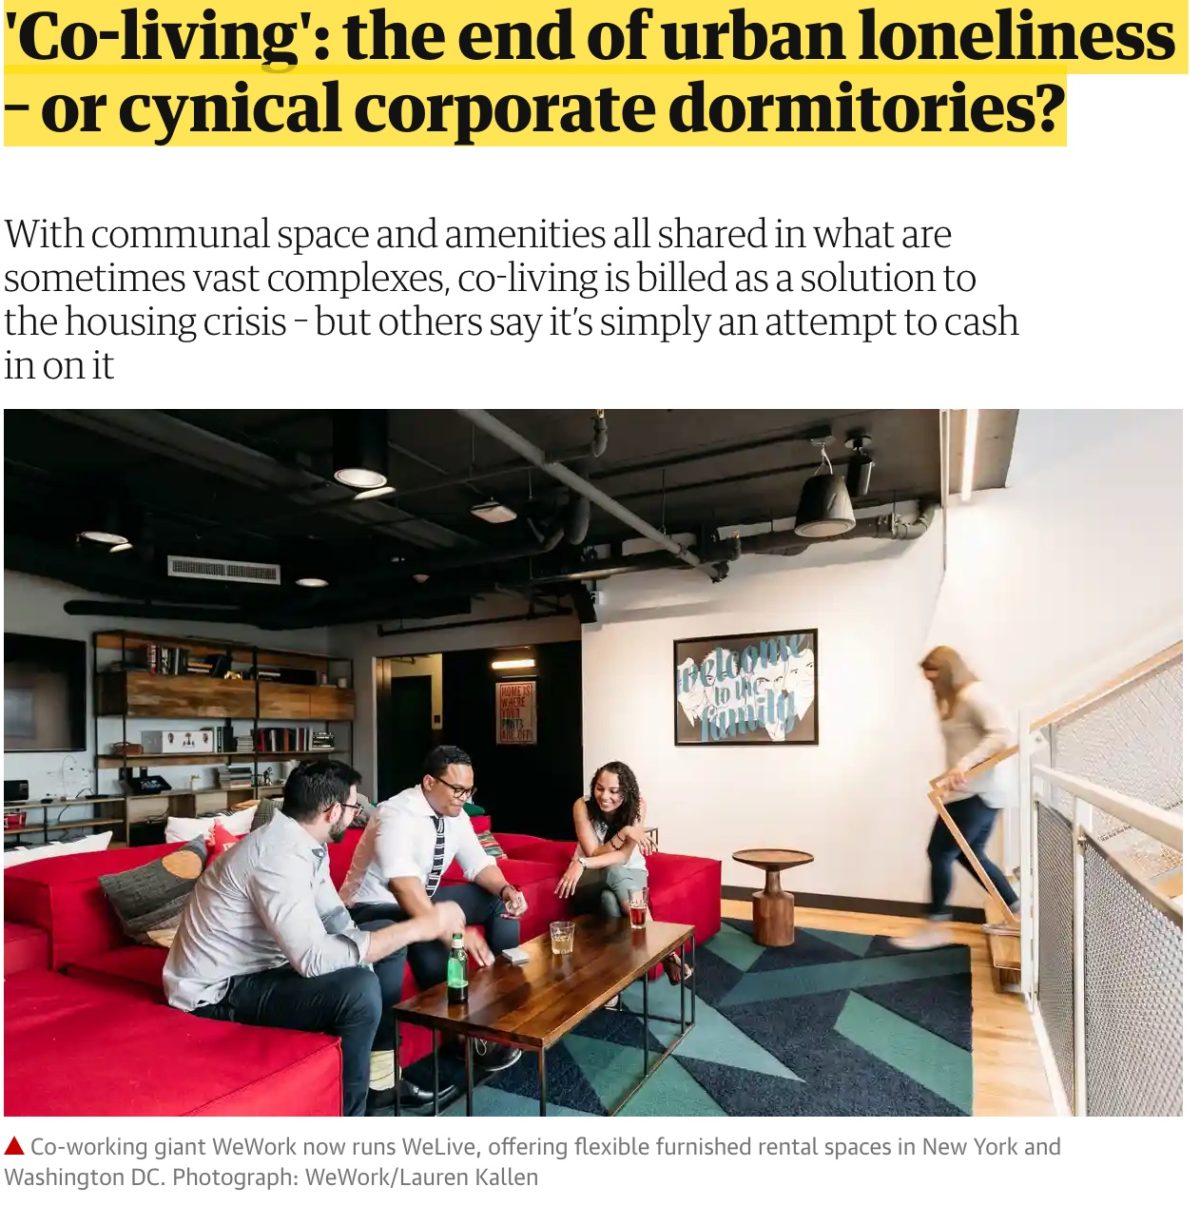 Coliving – a way to avoid loneliness or cynical corporate dormitories?